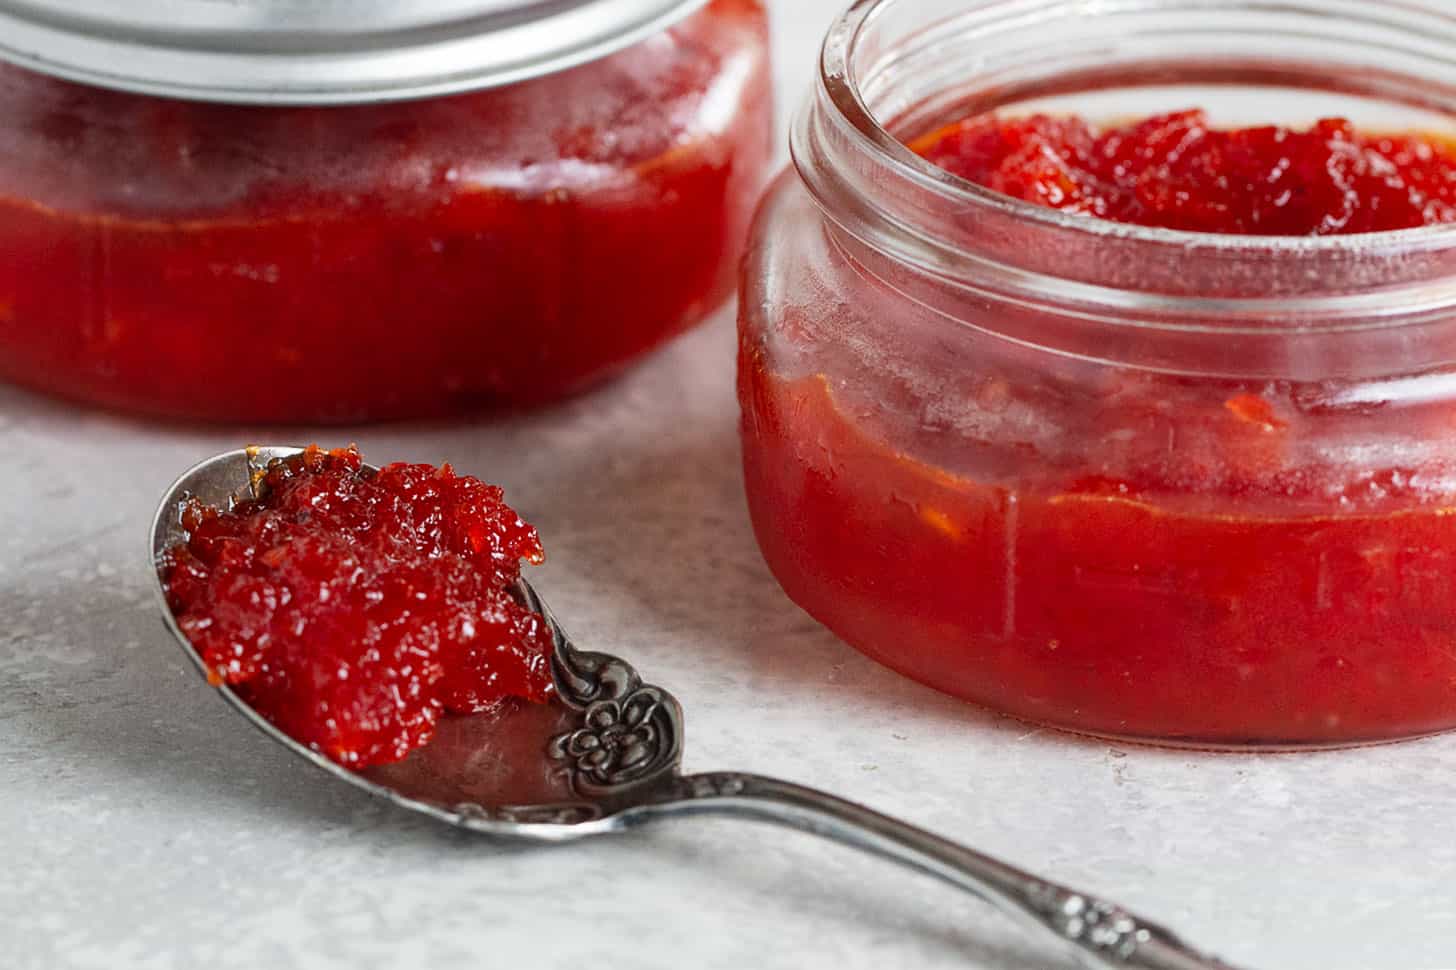 red pepper jam with jars and jam on spoon